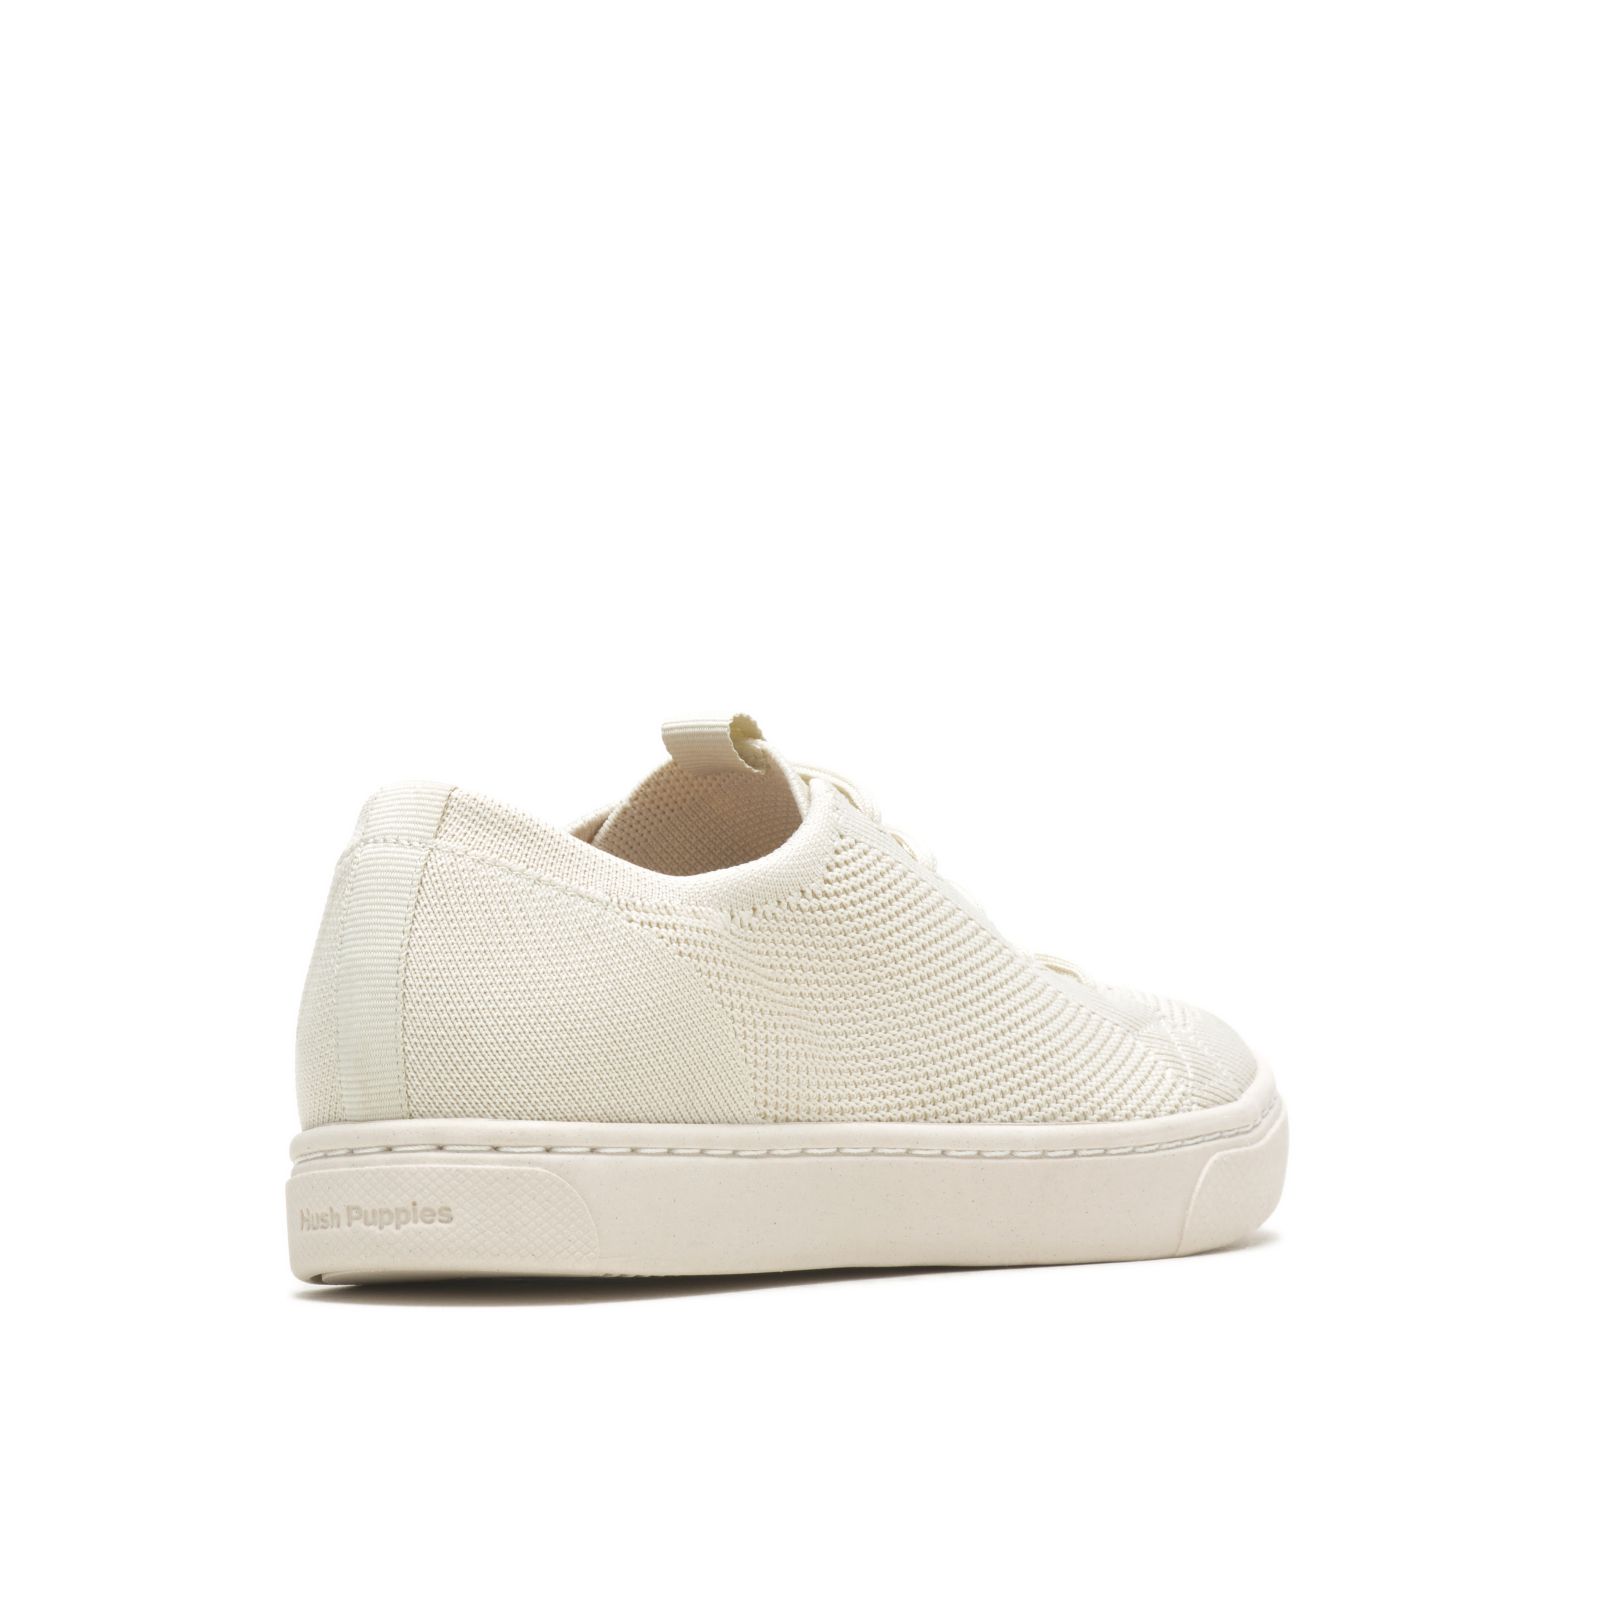 Tenis Hush Puppies The Good Low Top Mujer Grises | EQGPUBN-54